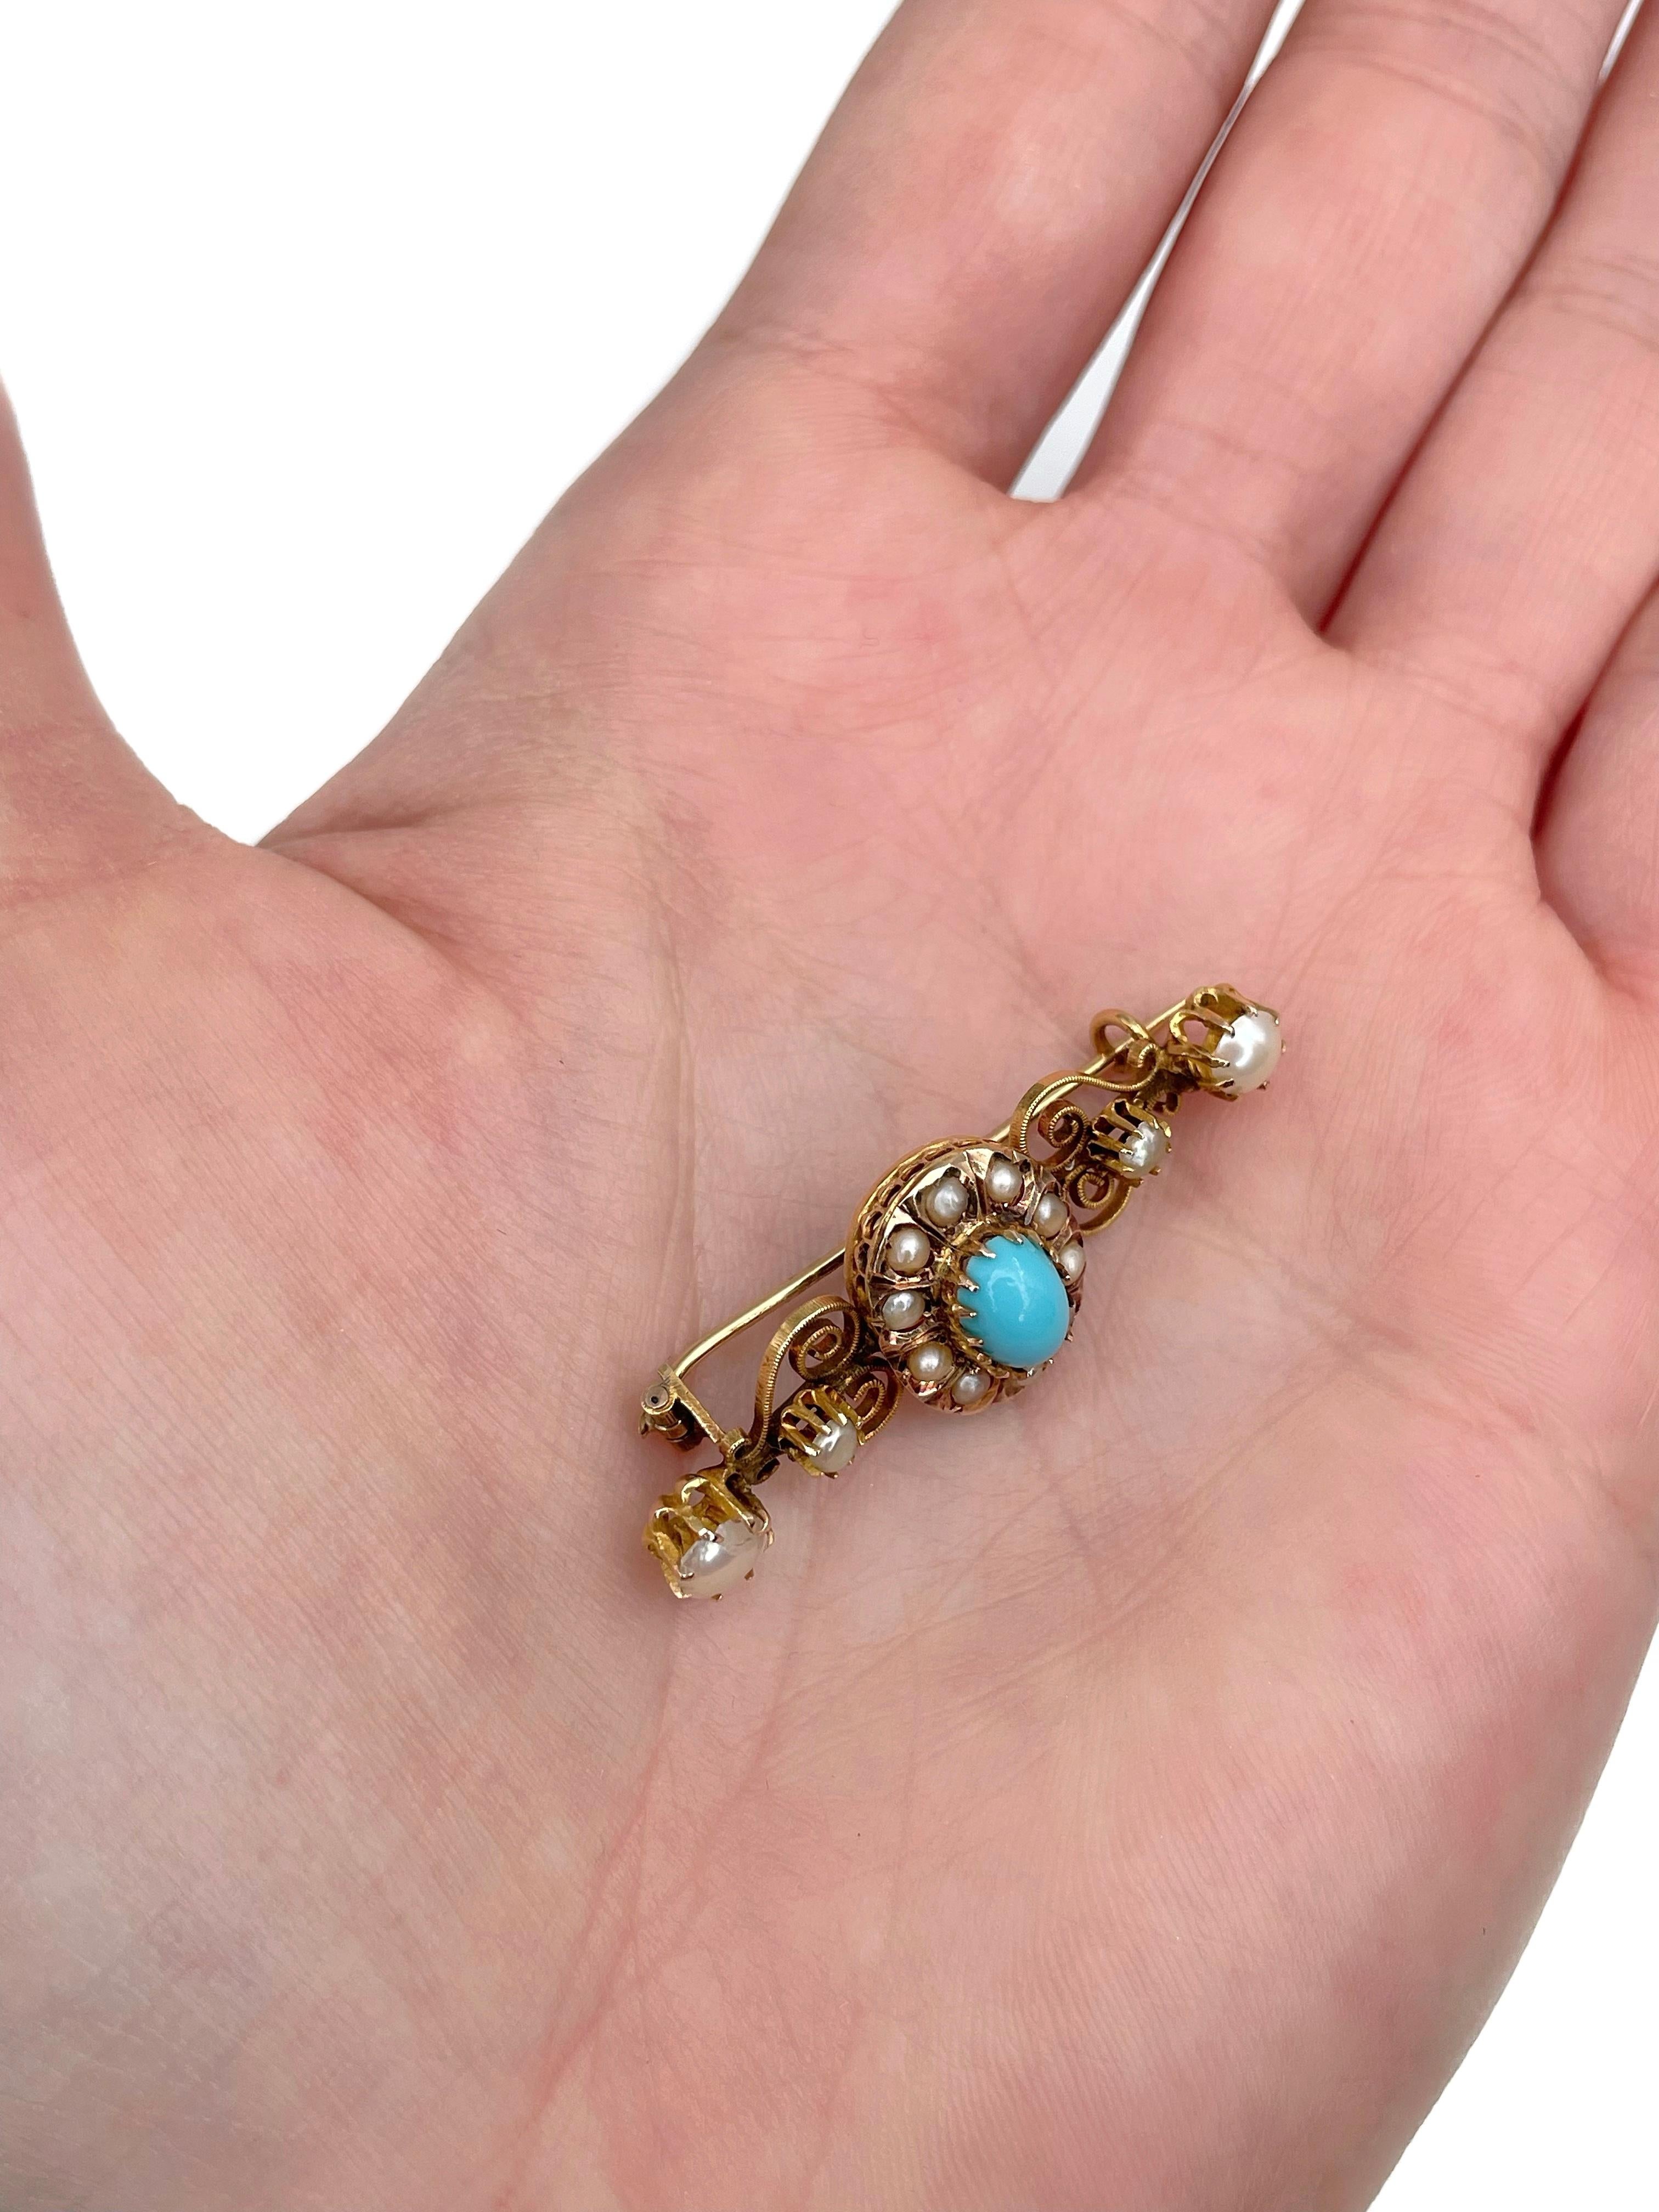 This is a Victorian bar brooch crafted in 18K yellow gold. Circa 1890.

The piece features an oval cabochon cut turquoise. The gem is accompanied with seed pearls.

Has a C clasp.

Weight: 3.37g
Length: 4cm

———

If you have any questions, please